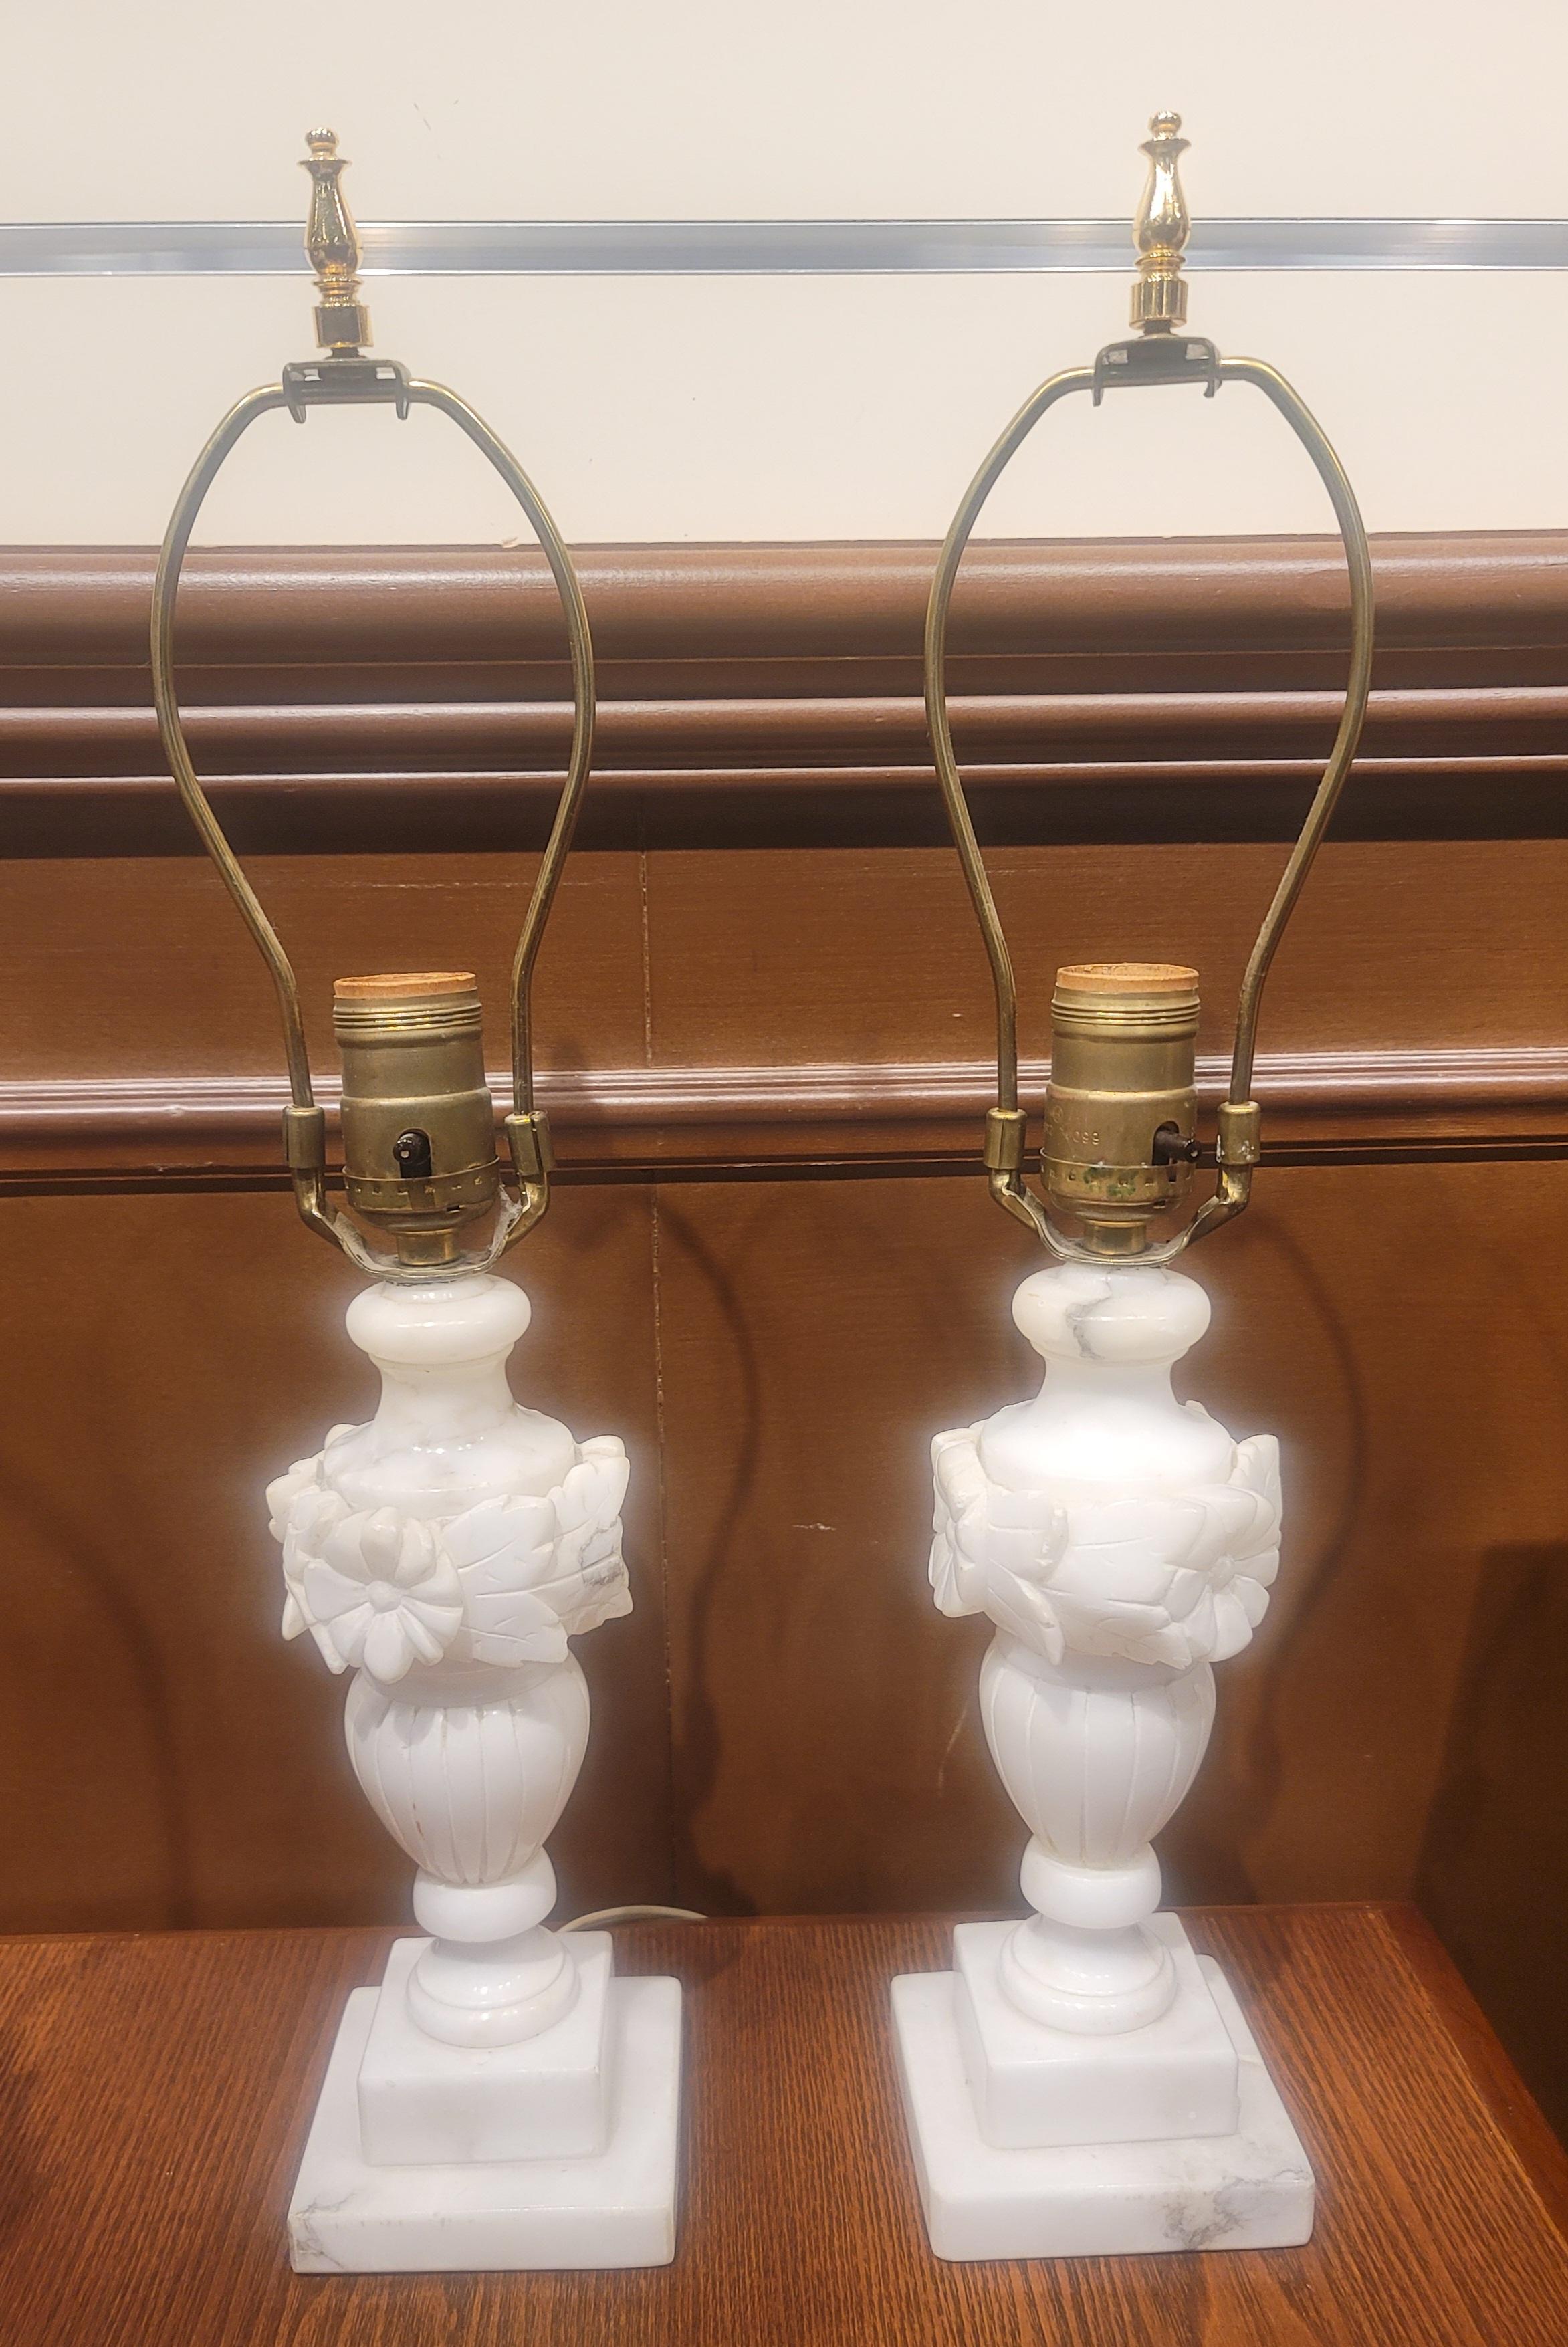 Pair of white Italian Marble lamp in great condition. Measure 3.5 inches in width at the base, 3.5 inches in depth and stands 18.75 inches to the top of the finials.